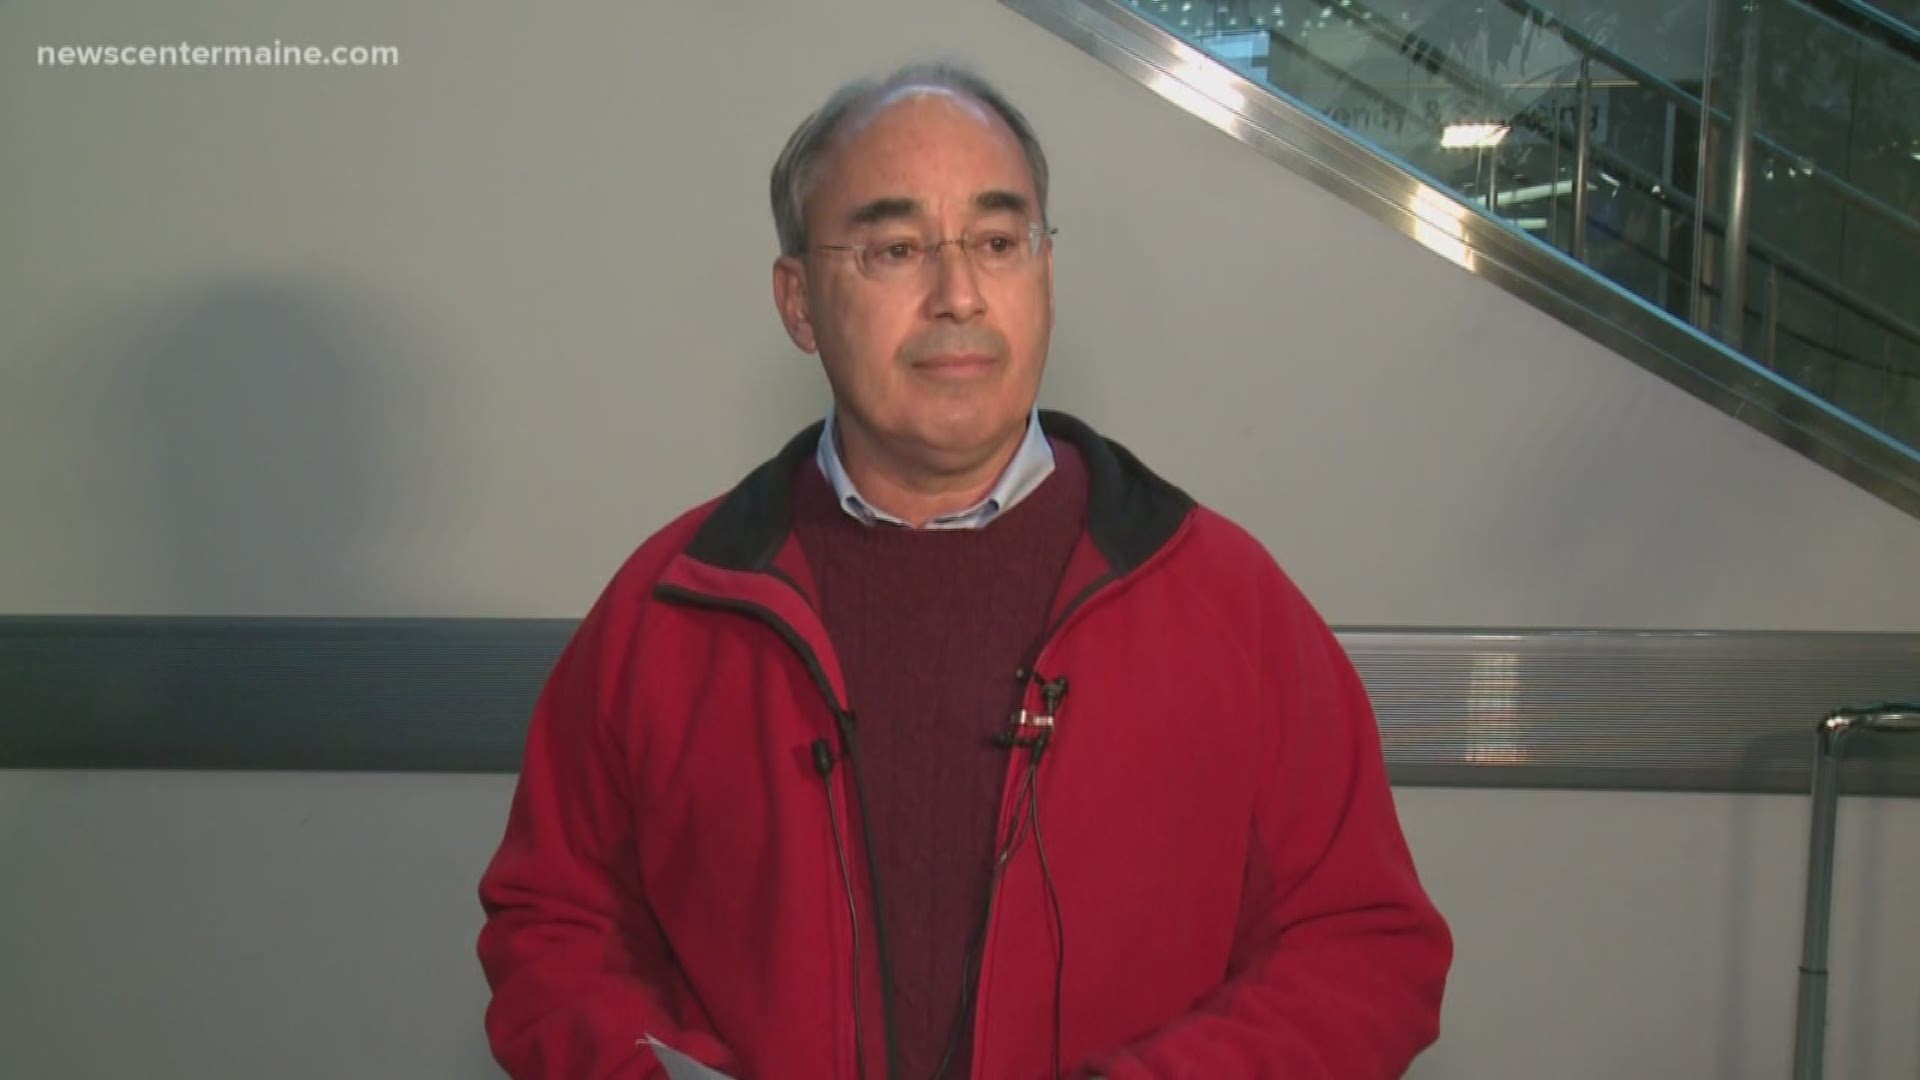 Congressman Bruce Poliquin says he is doing his duty under the constitution by challenging the results of Maine's ranked-choice vote - a vote that he lost.